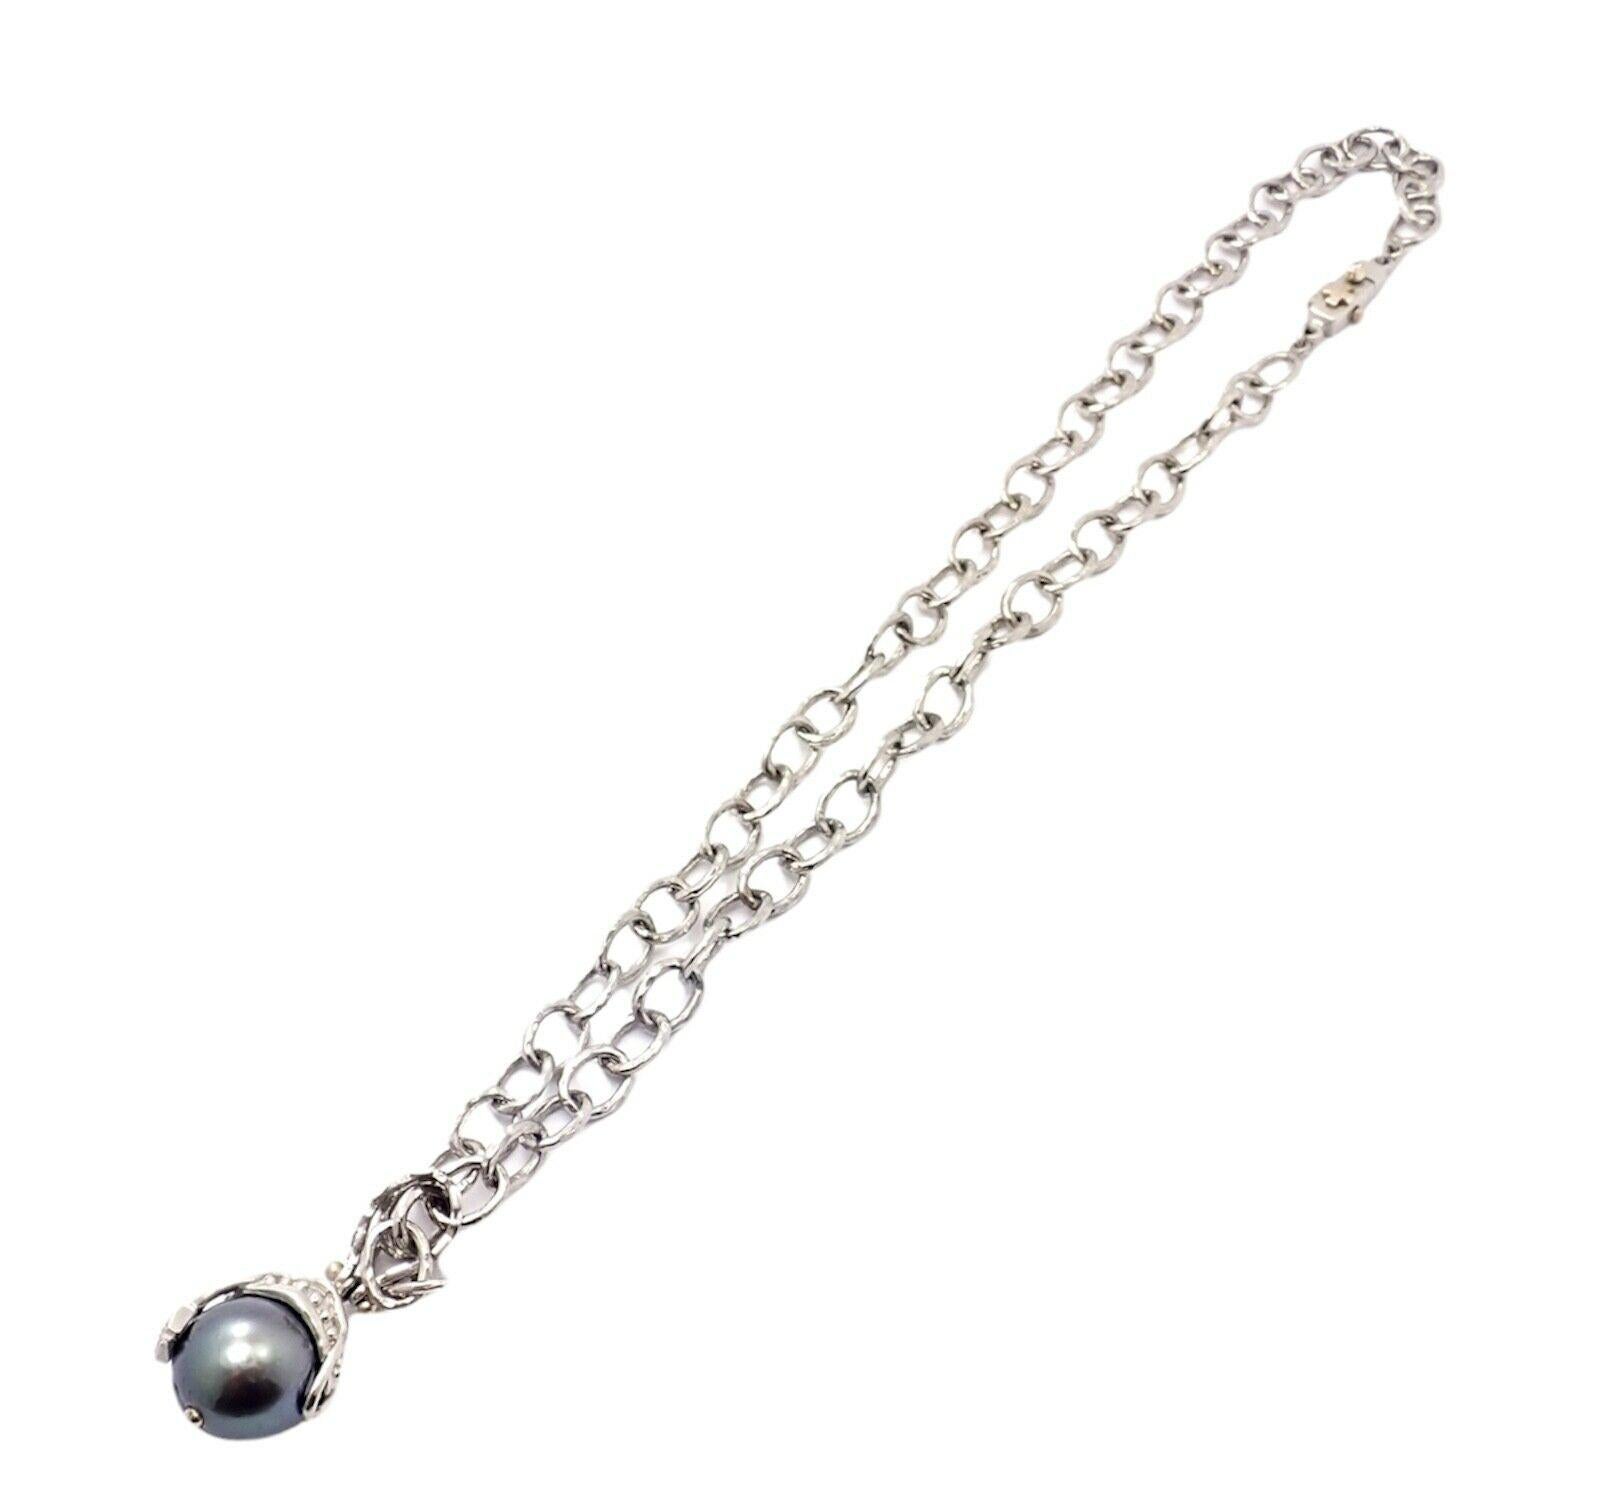 Platinum Diamond Tahitian South Sea Pearl Necklace by Loree Rodkin. 
With 18k Yellow Gold Accents.

With 21x Round Brilliant cut diamonds G color, VSI clarity total weight approximately 0.50ctw and 1x Tahitian South Sea Pearl measuring 13mm x 11mm